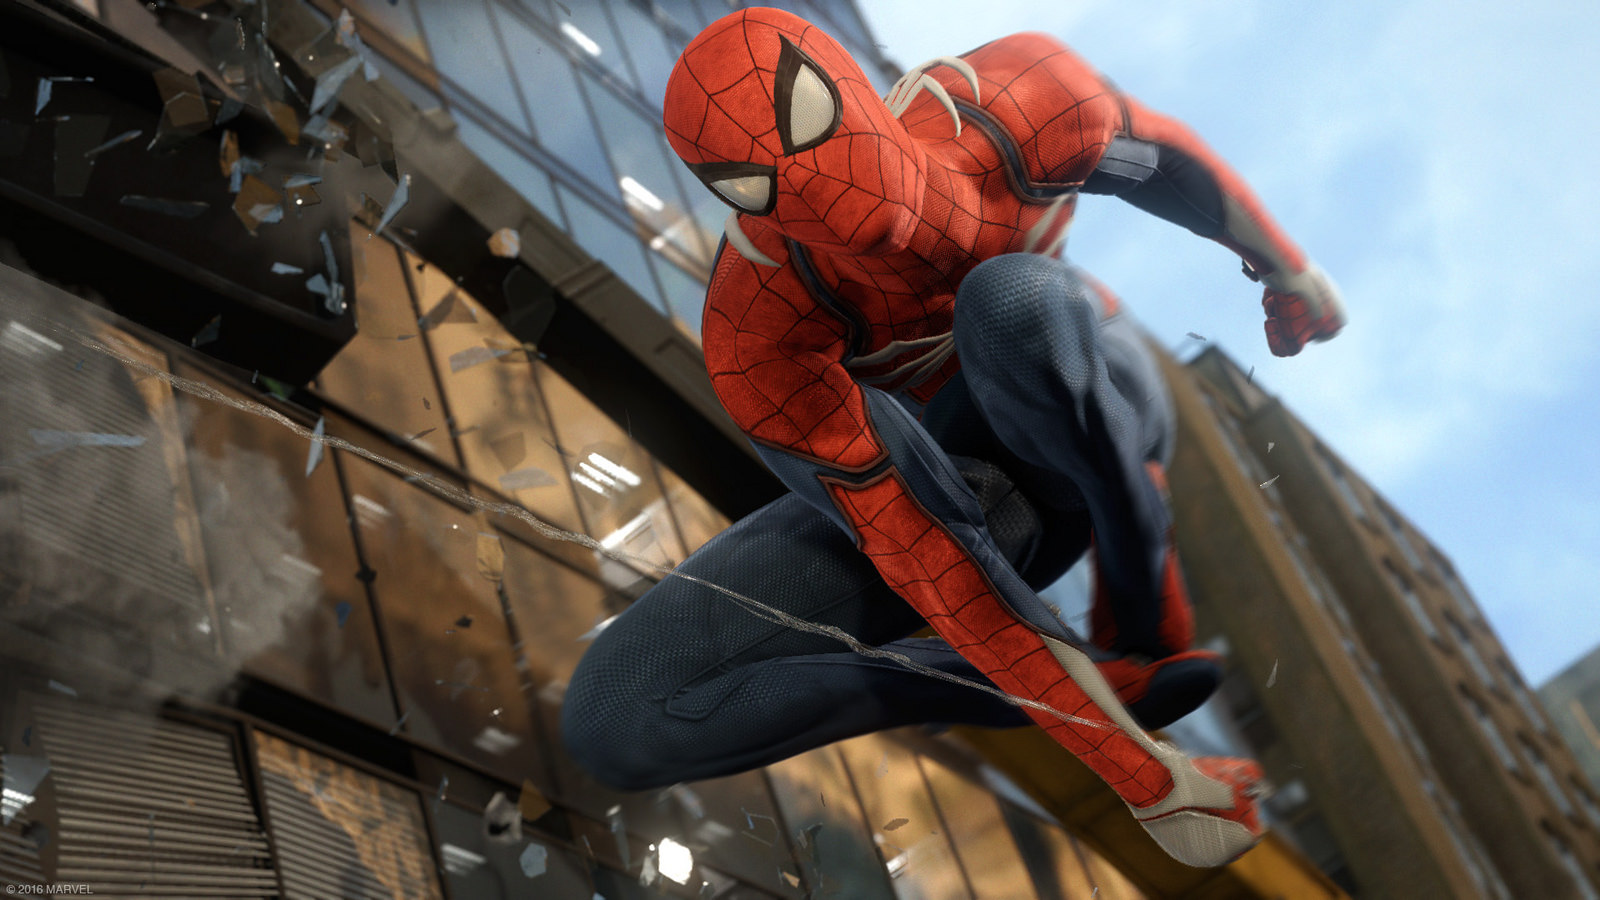 First Images Of Spider-Man PC Leaked Online A Week Before Release